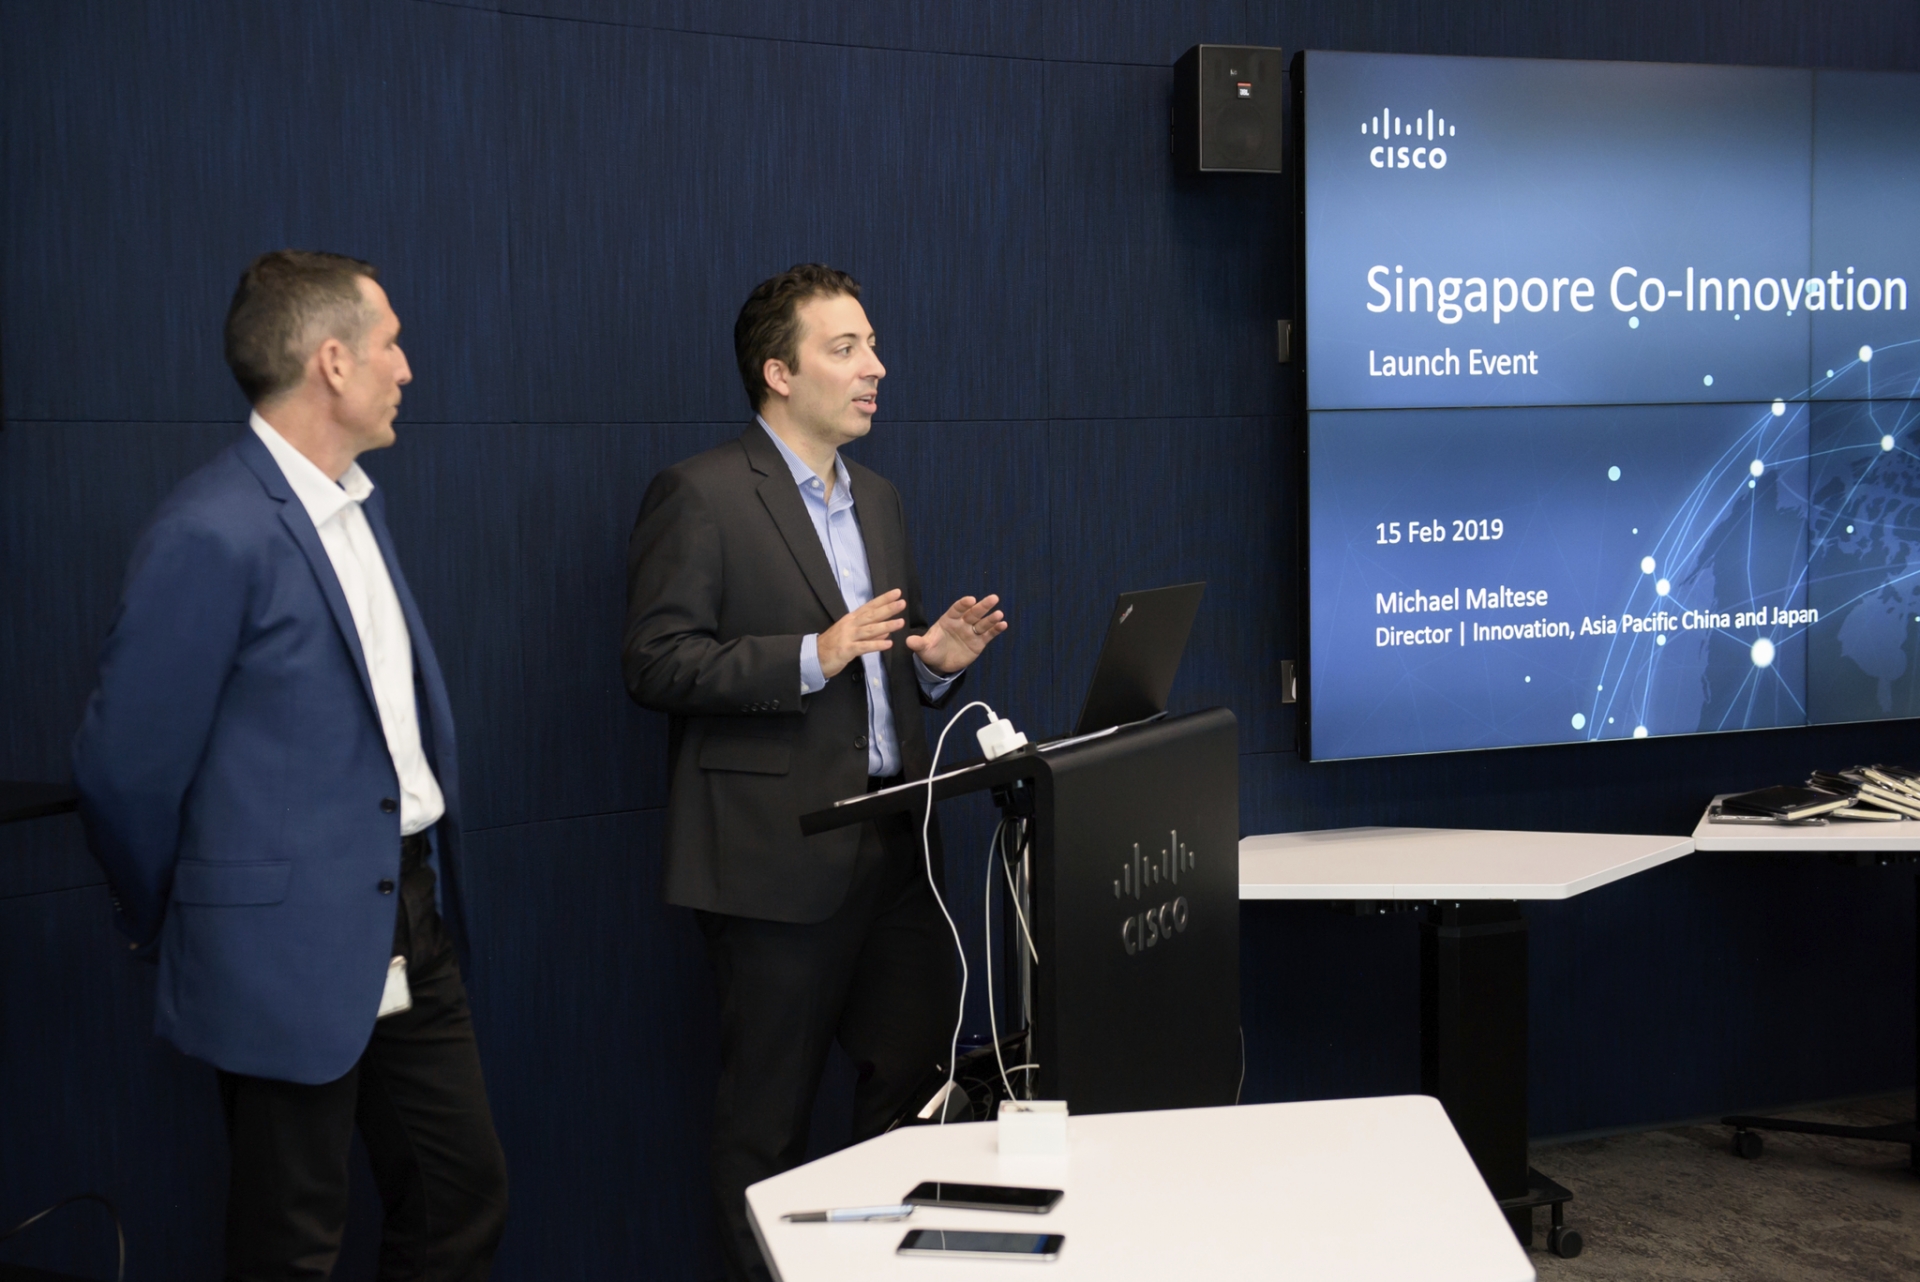 Cisco Co-Innovation Centers accelerate opportunities